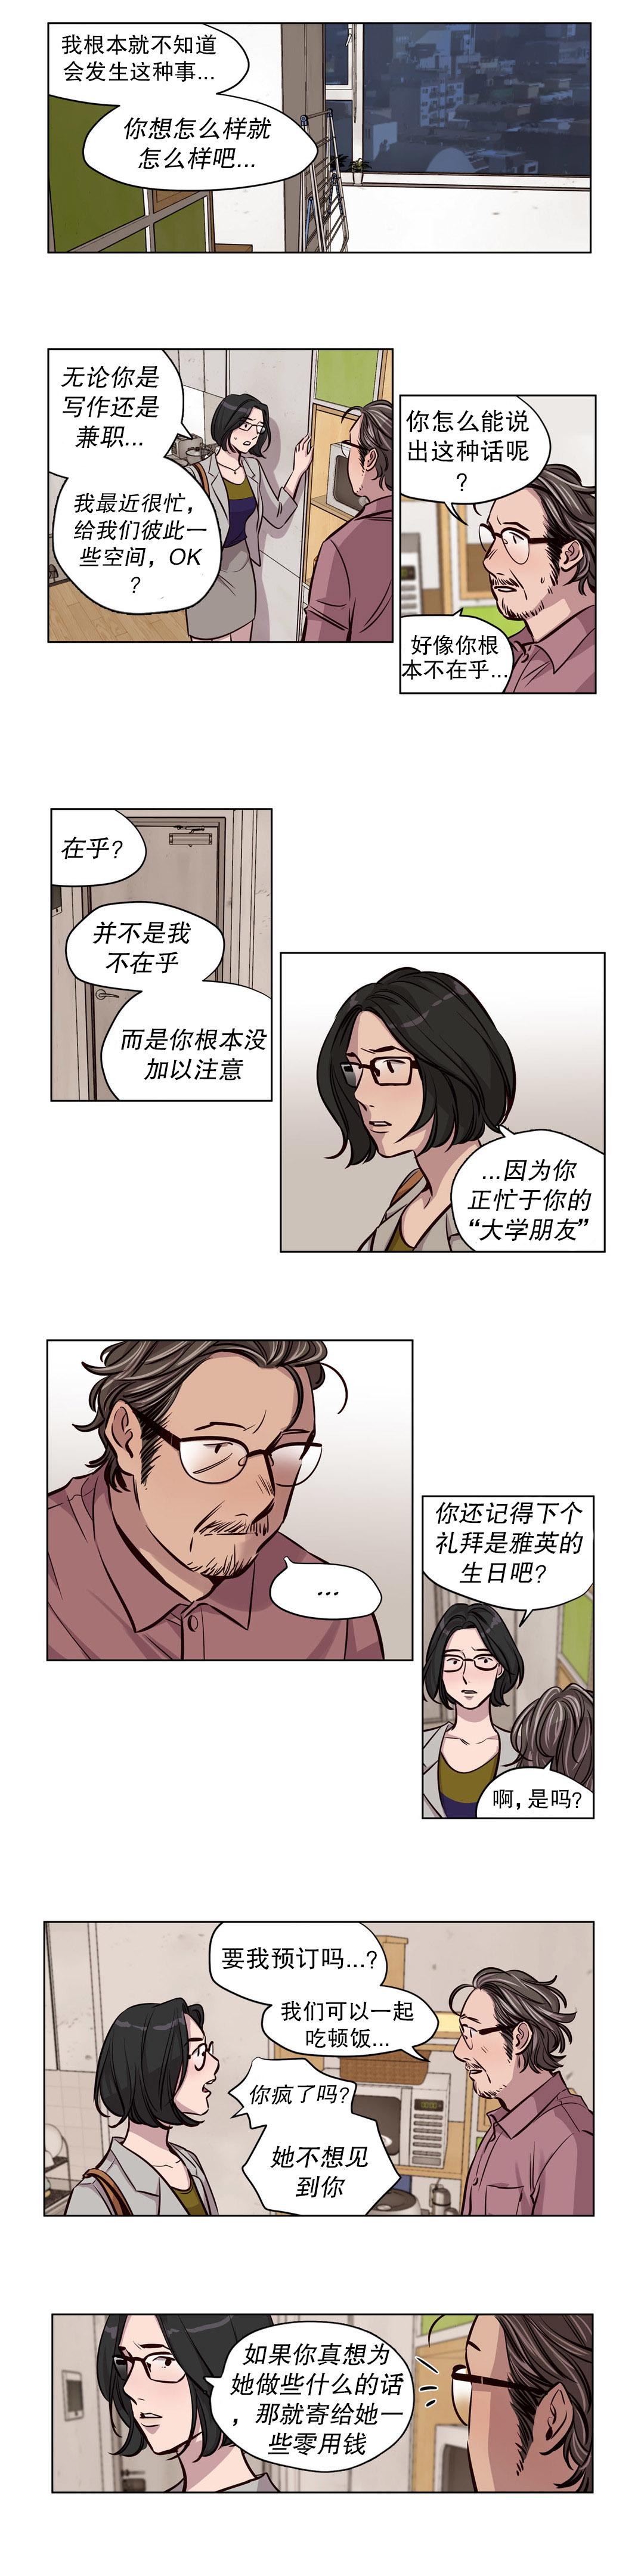 [Ramjak] 赎罪营(Atonement Camp) Ch.50-52 (Chinese) 5